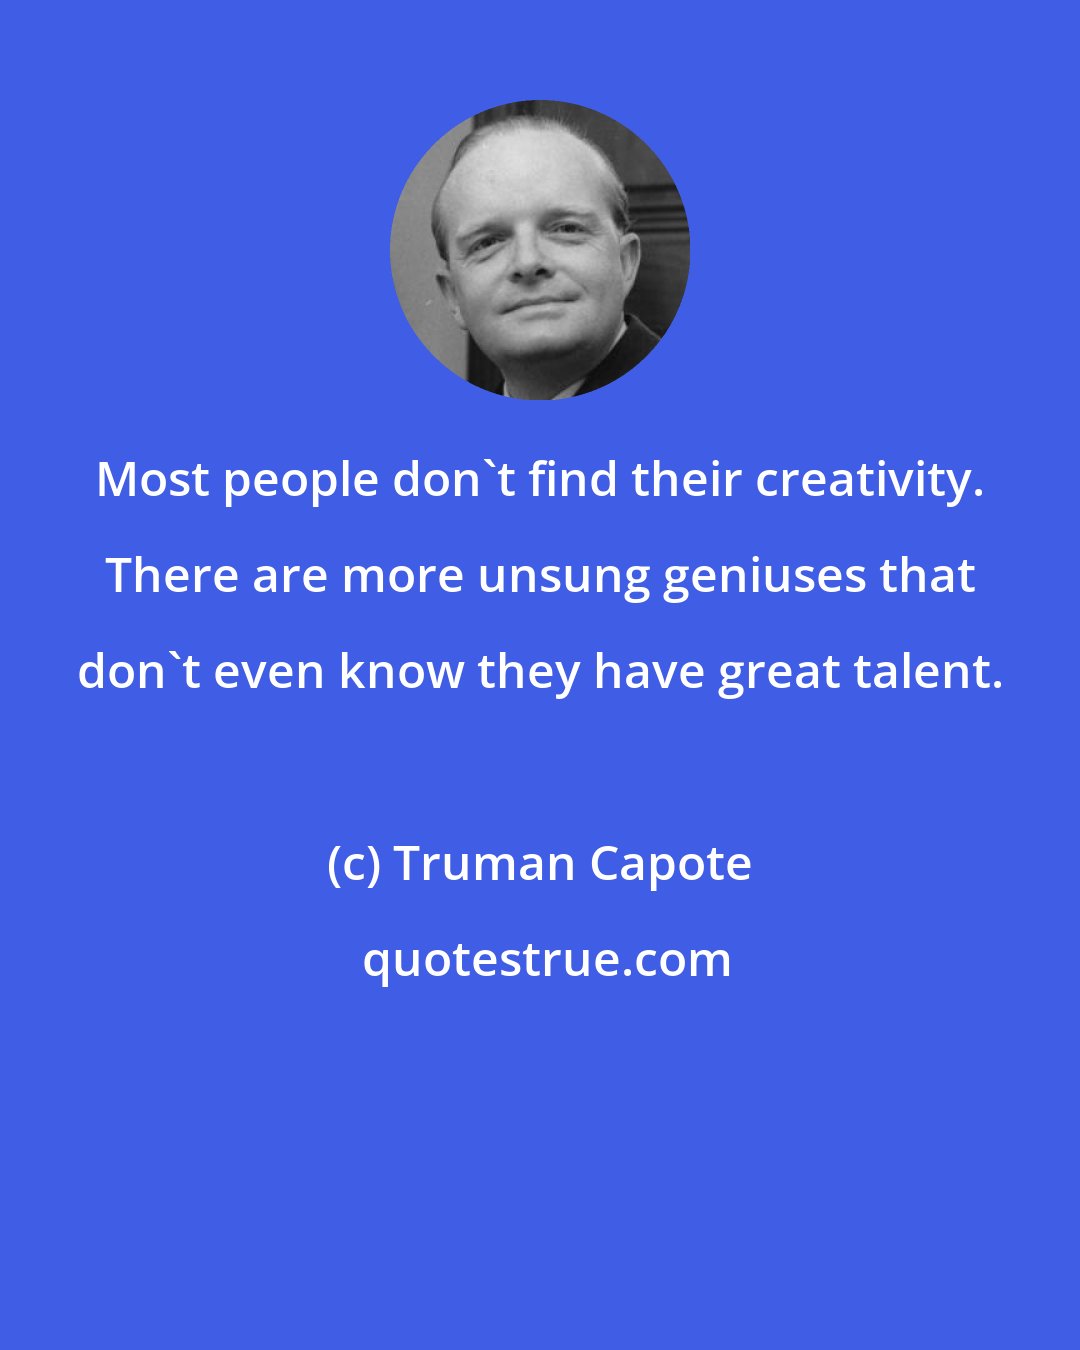 Truman Capote: Most people don't find their creativity. There are more unsung geniuses that don't even know they have great talent.